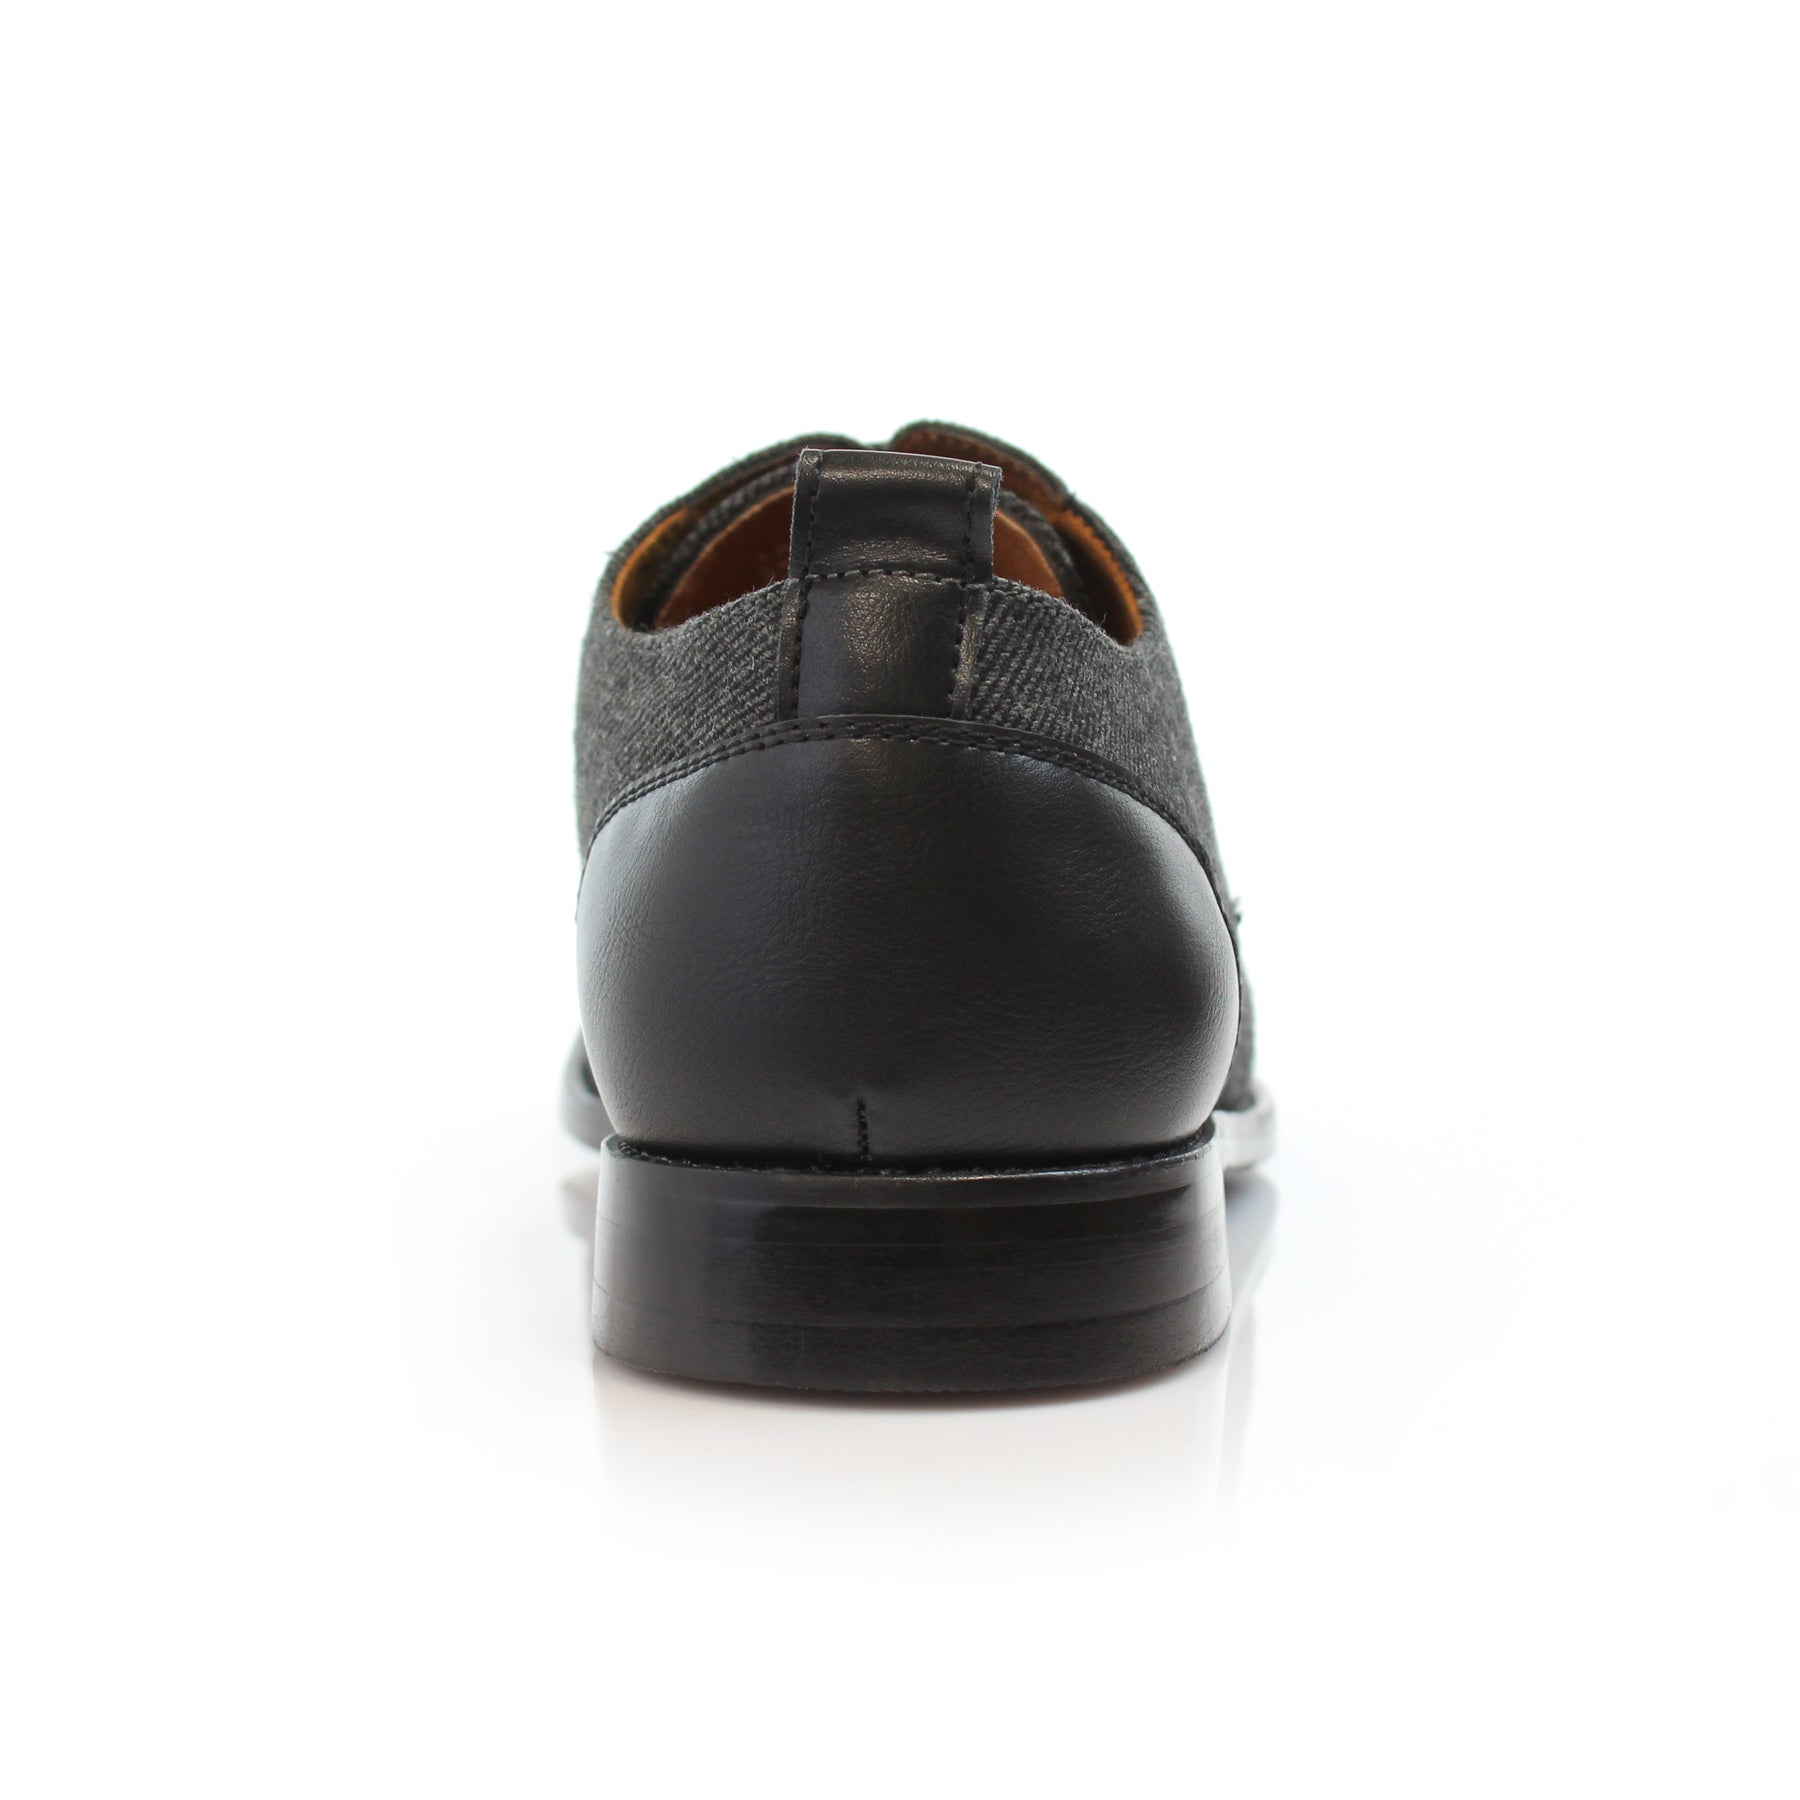 Duo-textured Woolen Derby Dress Shoes | Clifford by Polar Fox | Conal Footwear | Back Angle View